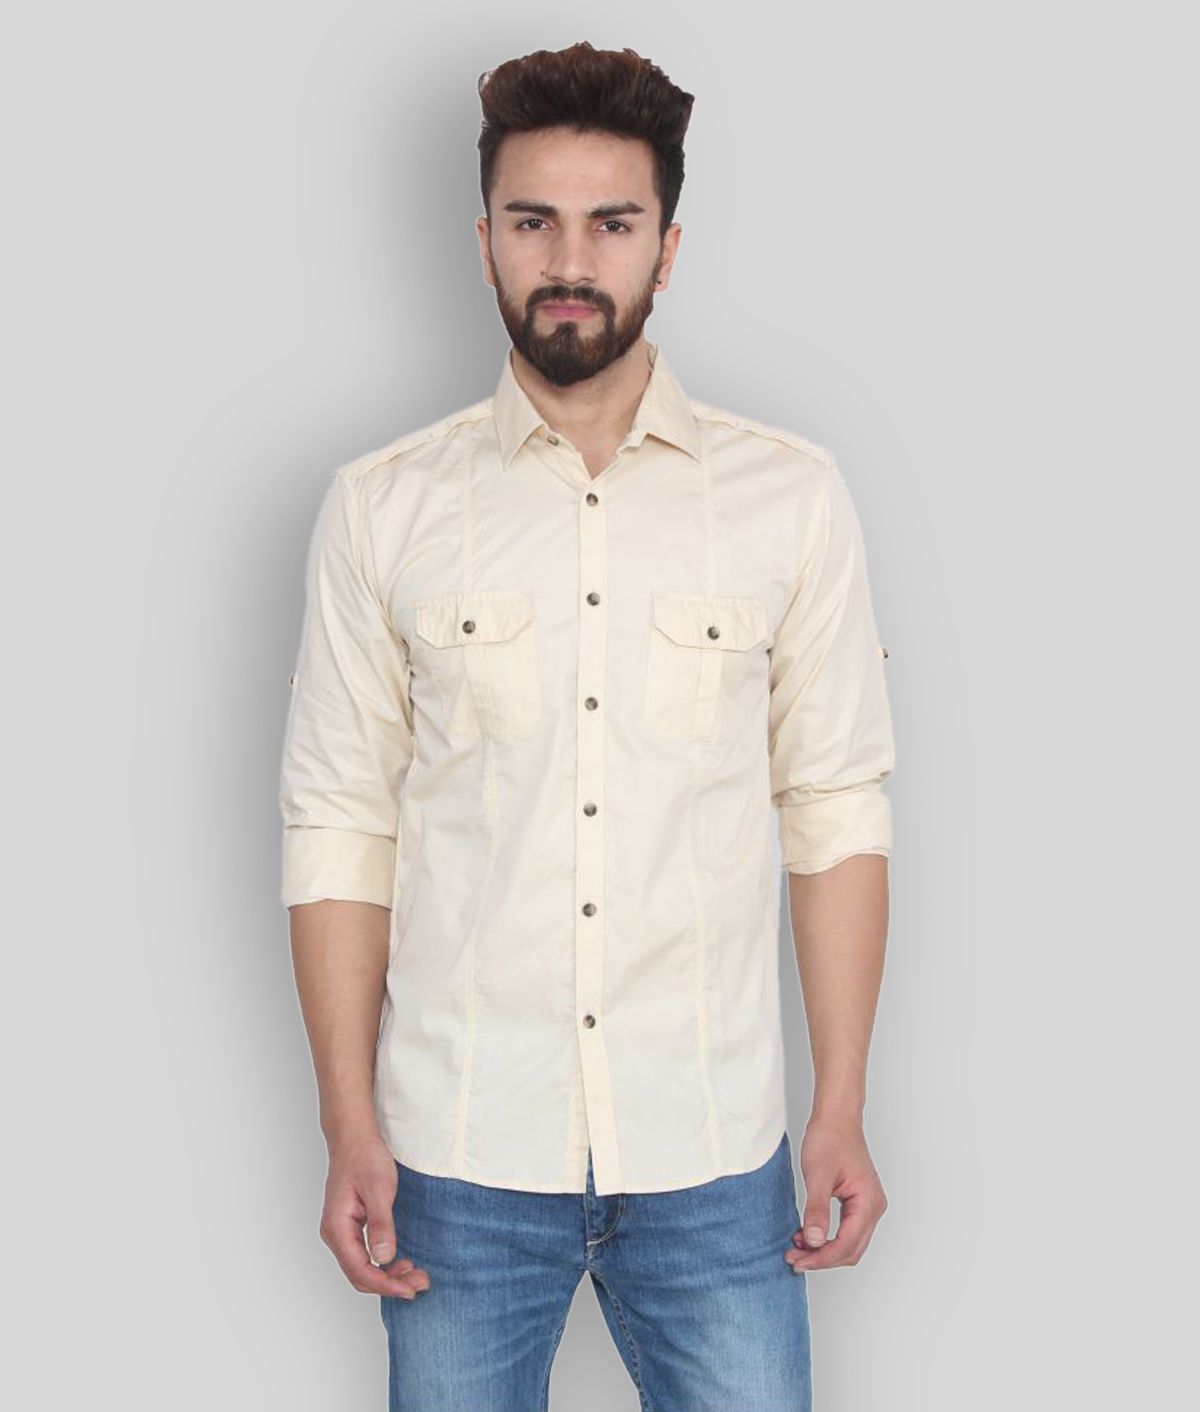     			Hangup - Off-White Cotton Slim Fit Men's Casual Shirt ( Pack of 1 )